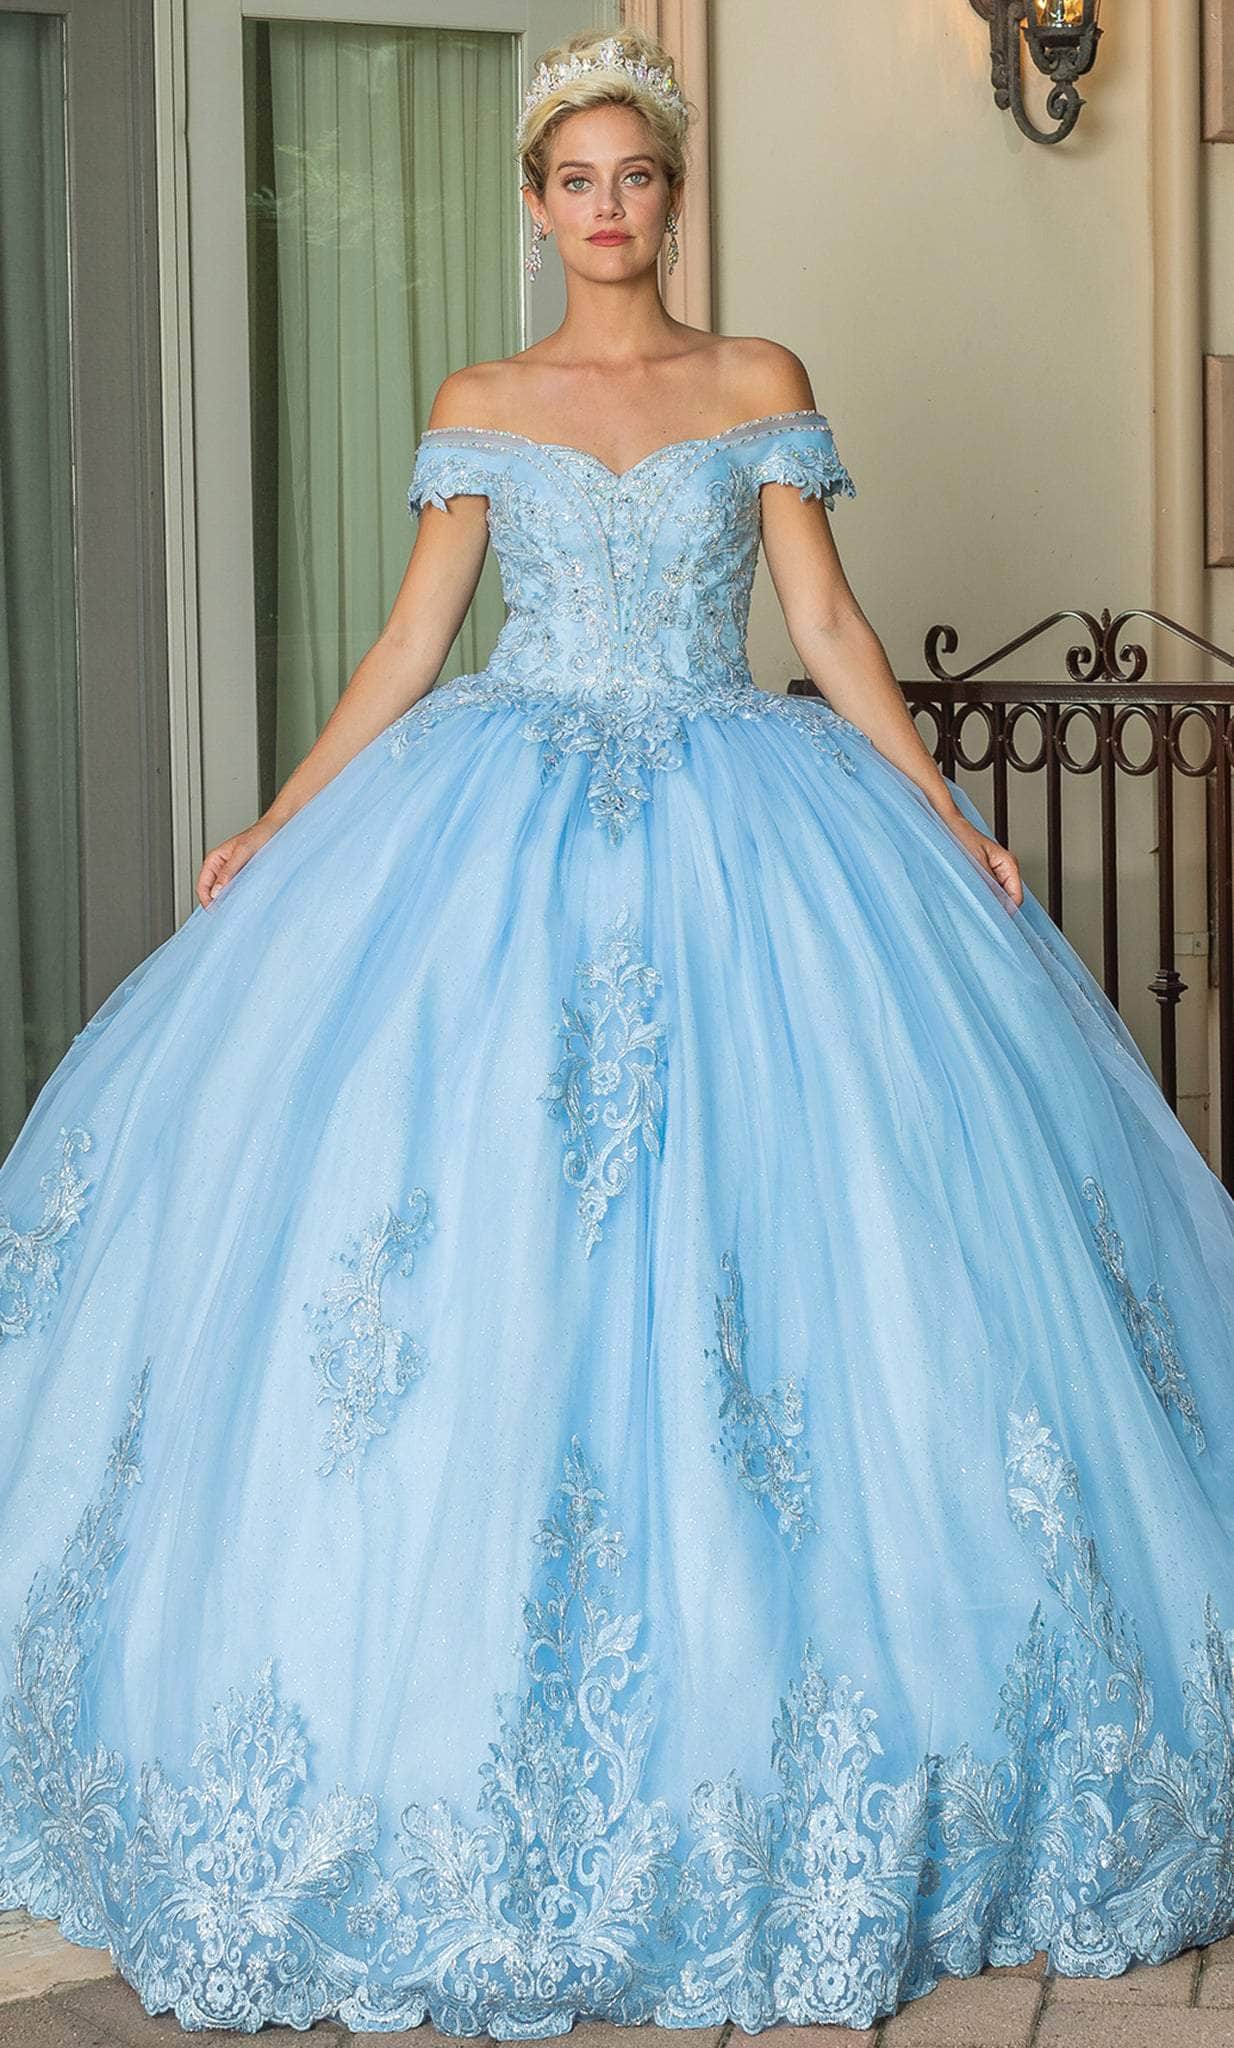 Image of Dancing Queen 1699 - Lace Detail Quinceanera Ballgown